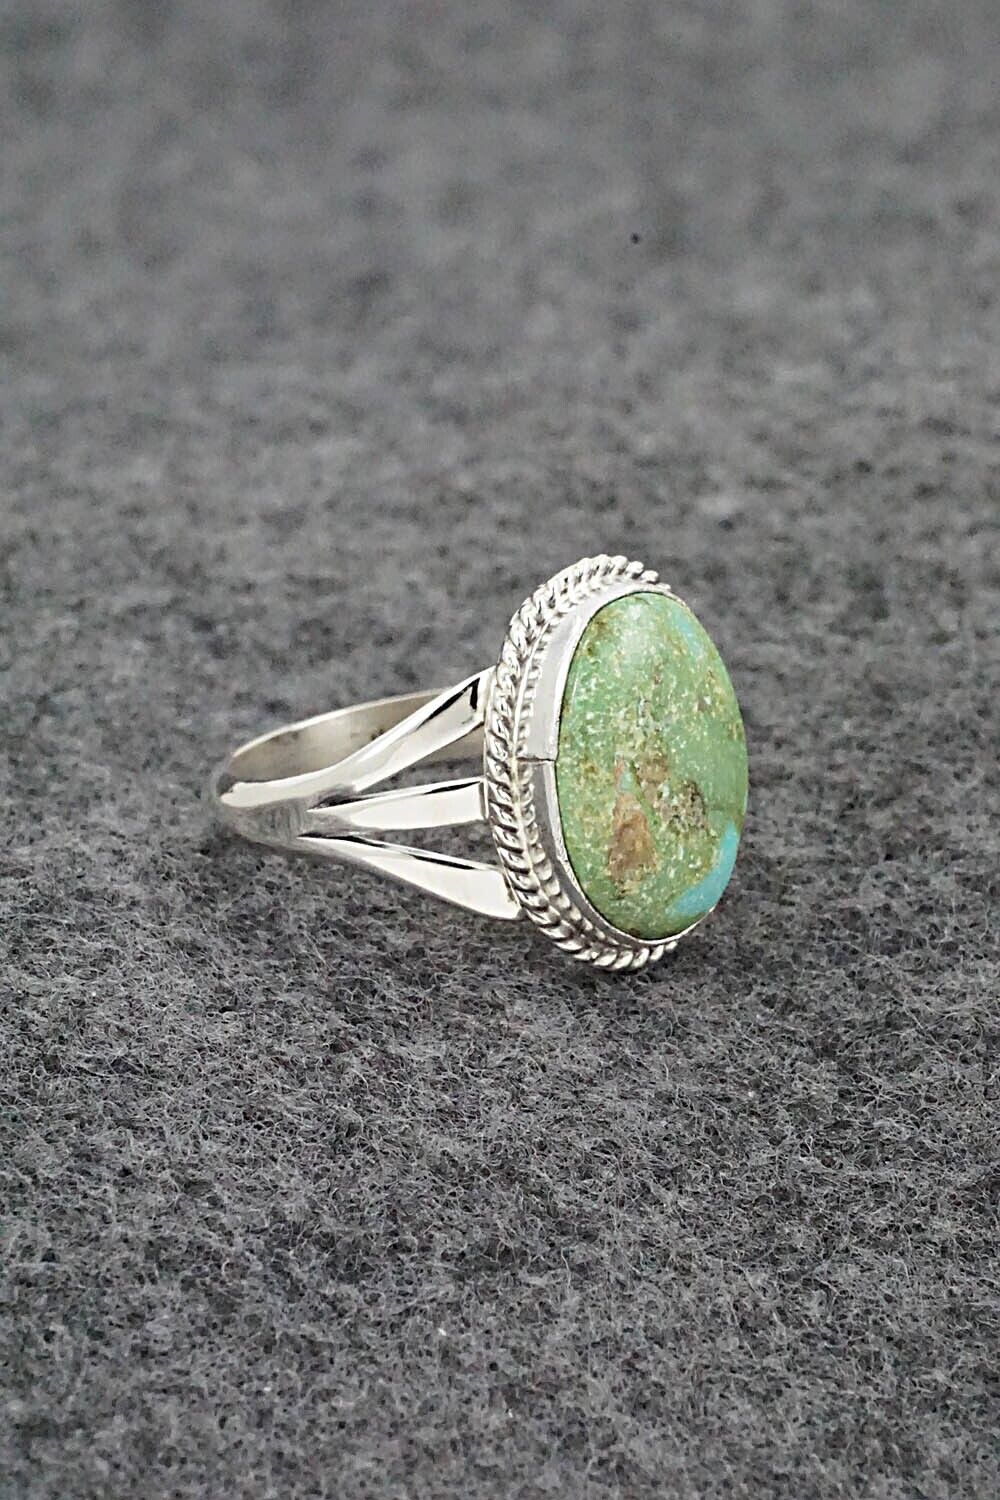 Turquoise & Sterling Silver Ring - Judy Largo - Size 8.5